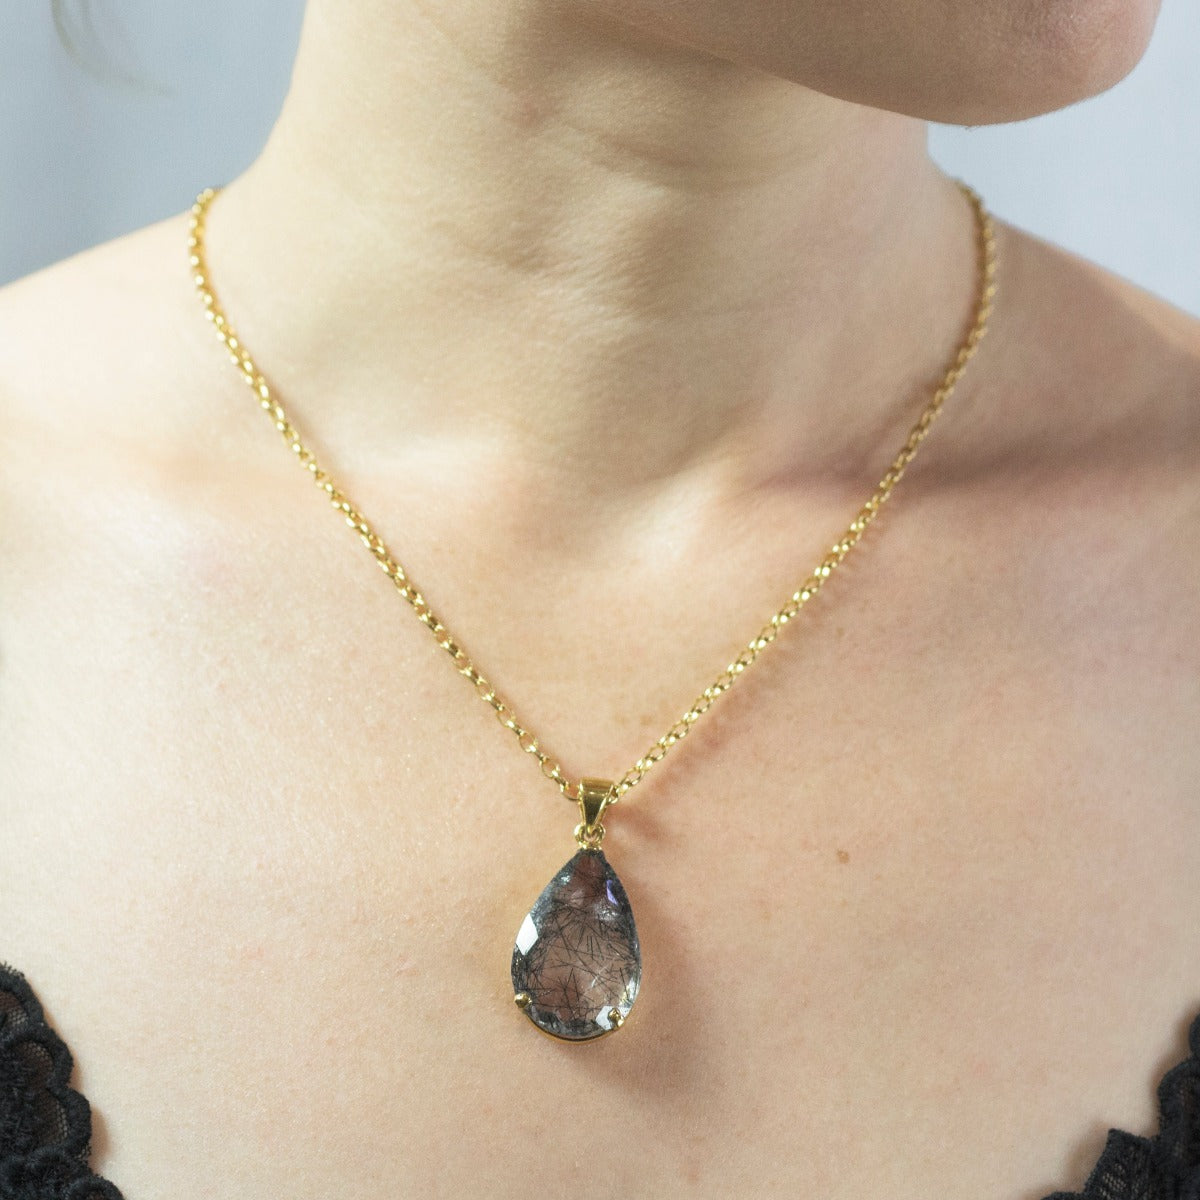 14k yellow gold vermeil tear black and clear faceted Tourmalinated Quartz Necklace on model